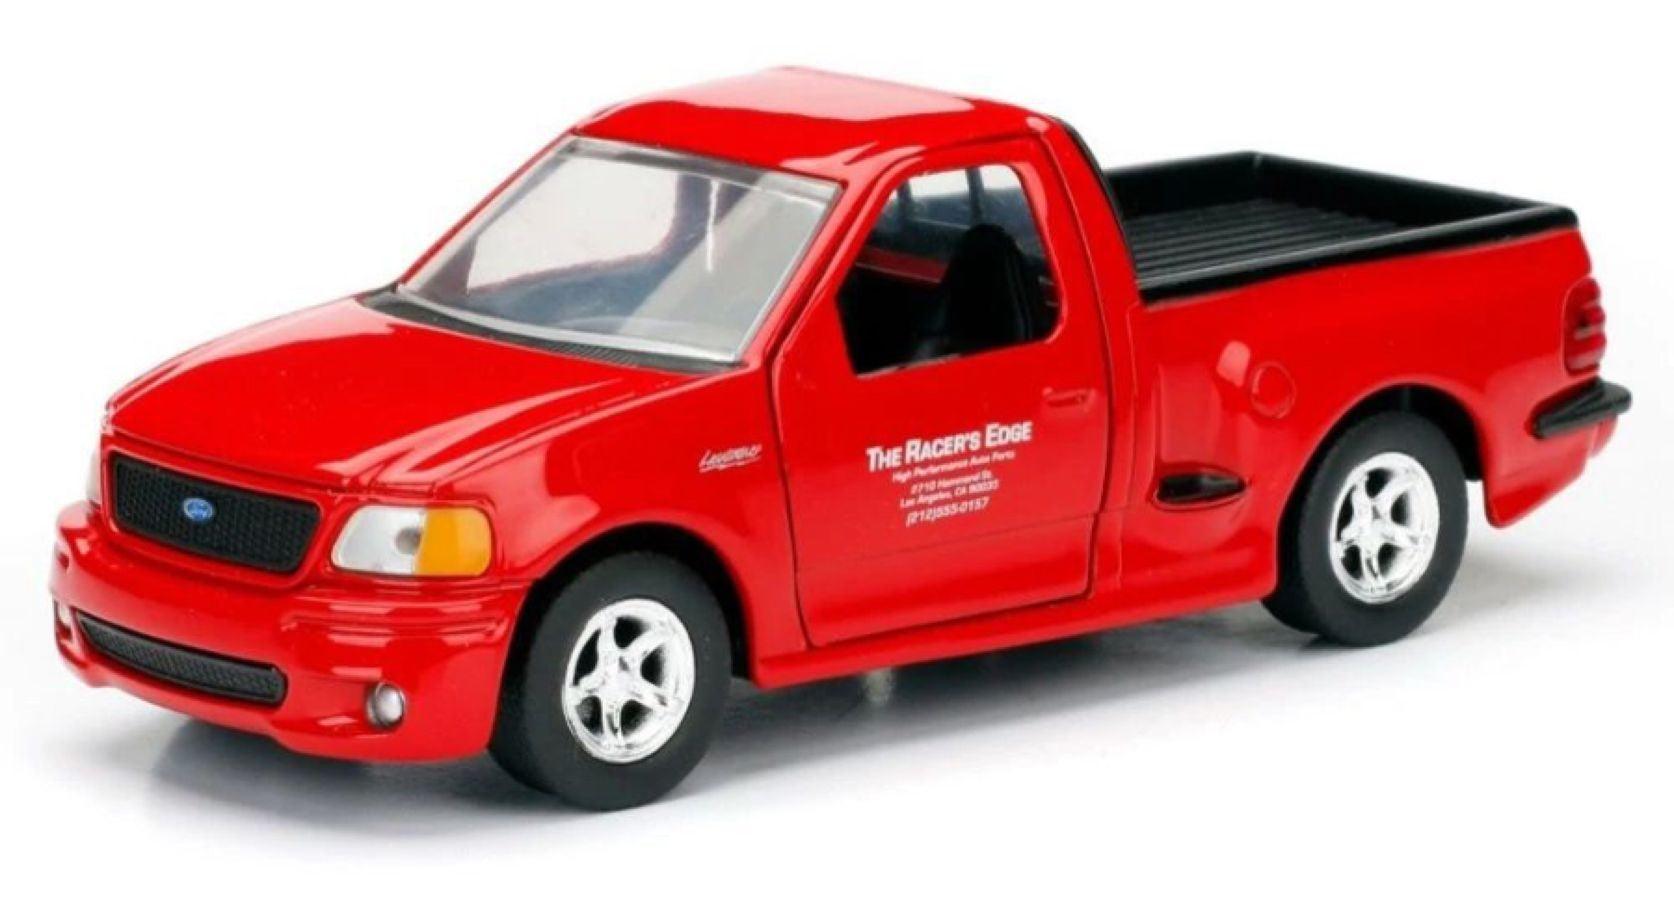 JAD98320 Fast and Furious - 1999 Ford F-150 Lightning 1:32 Scale Hollywood Ride - Jada Toys - Titan Pop Culture